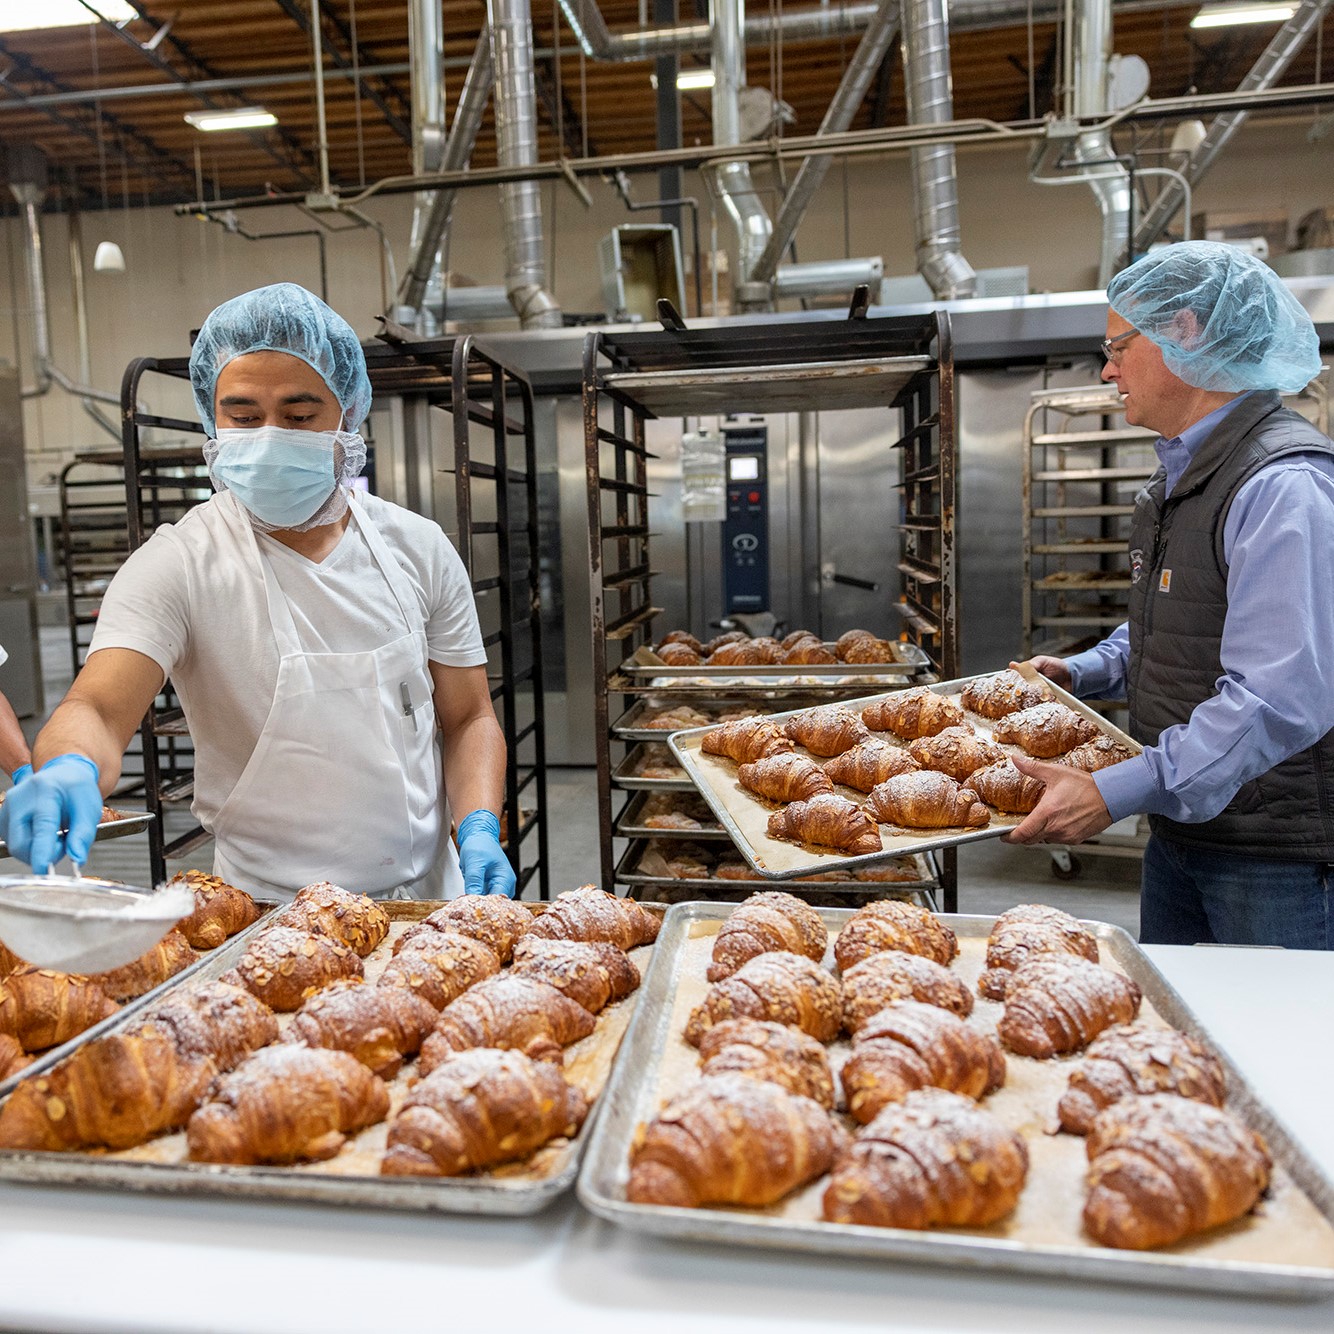 Baker applies confectioner sugar to freshly baked croissants while owner moves completed creations to racks.